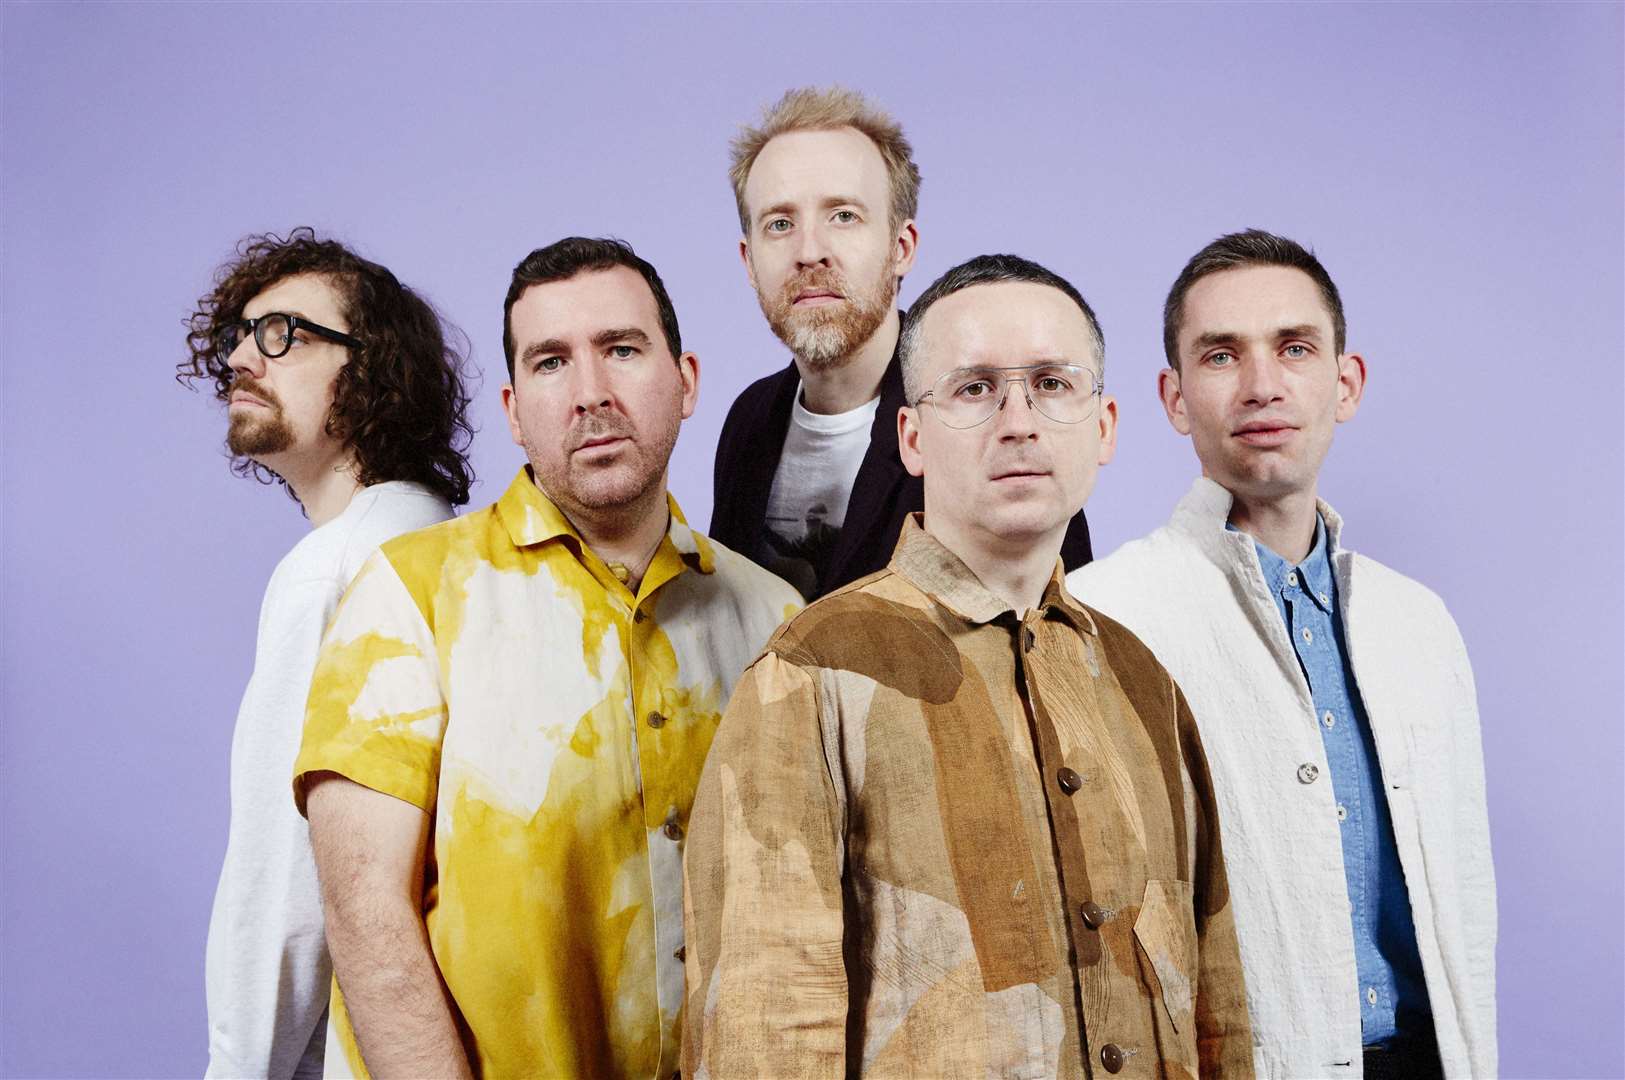 Hot Chip wiil play a live streamed gig at 'Streamland'